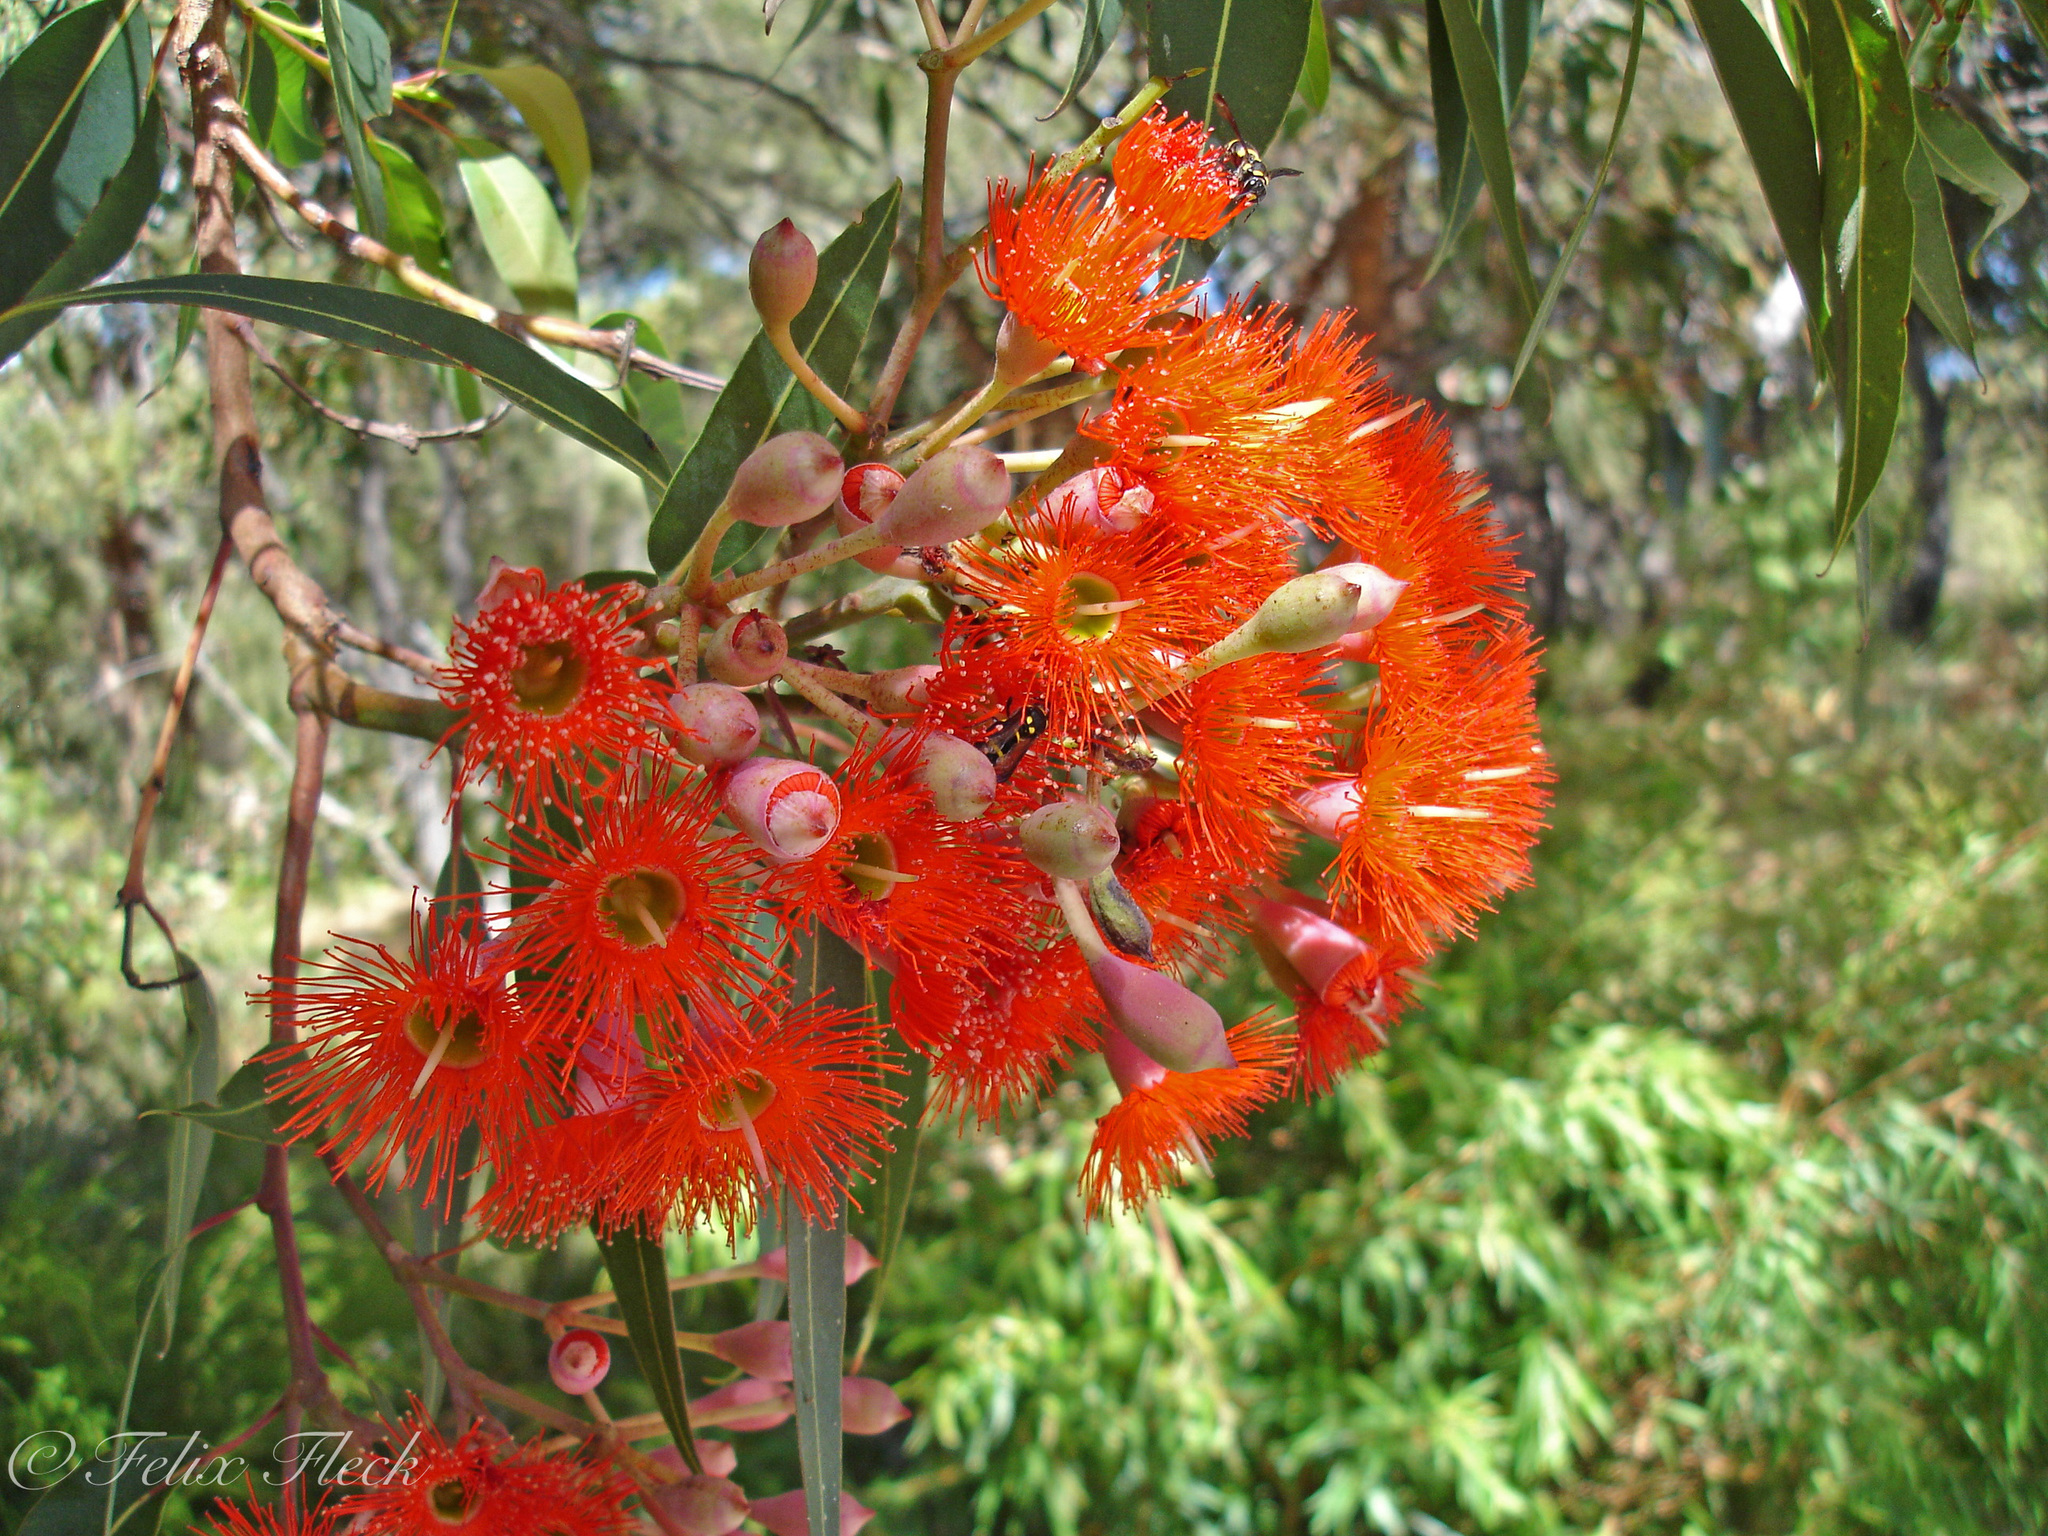 How to prune a flowering gum